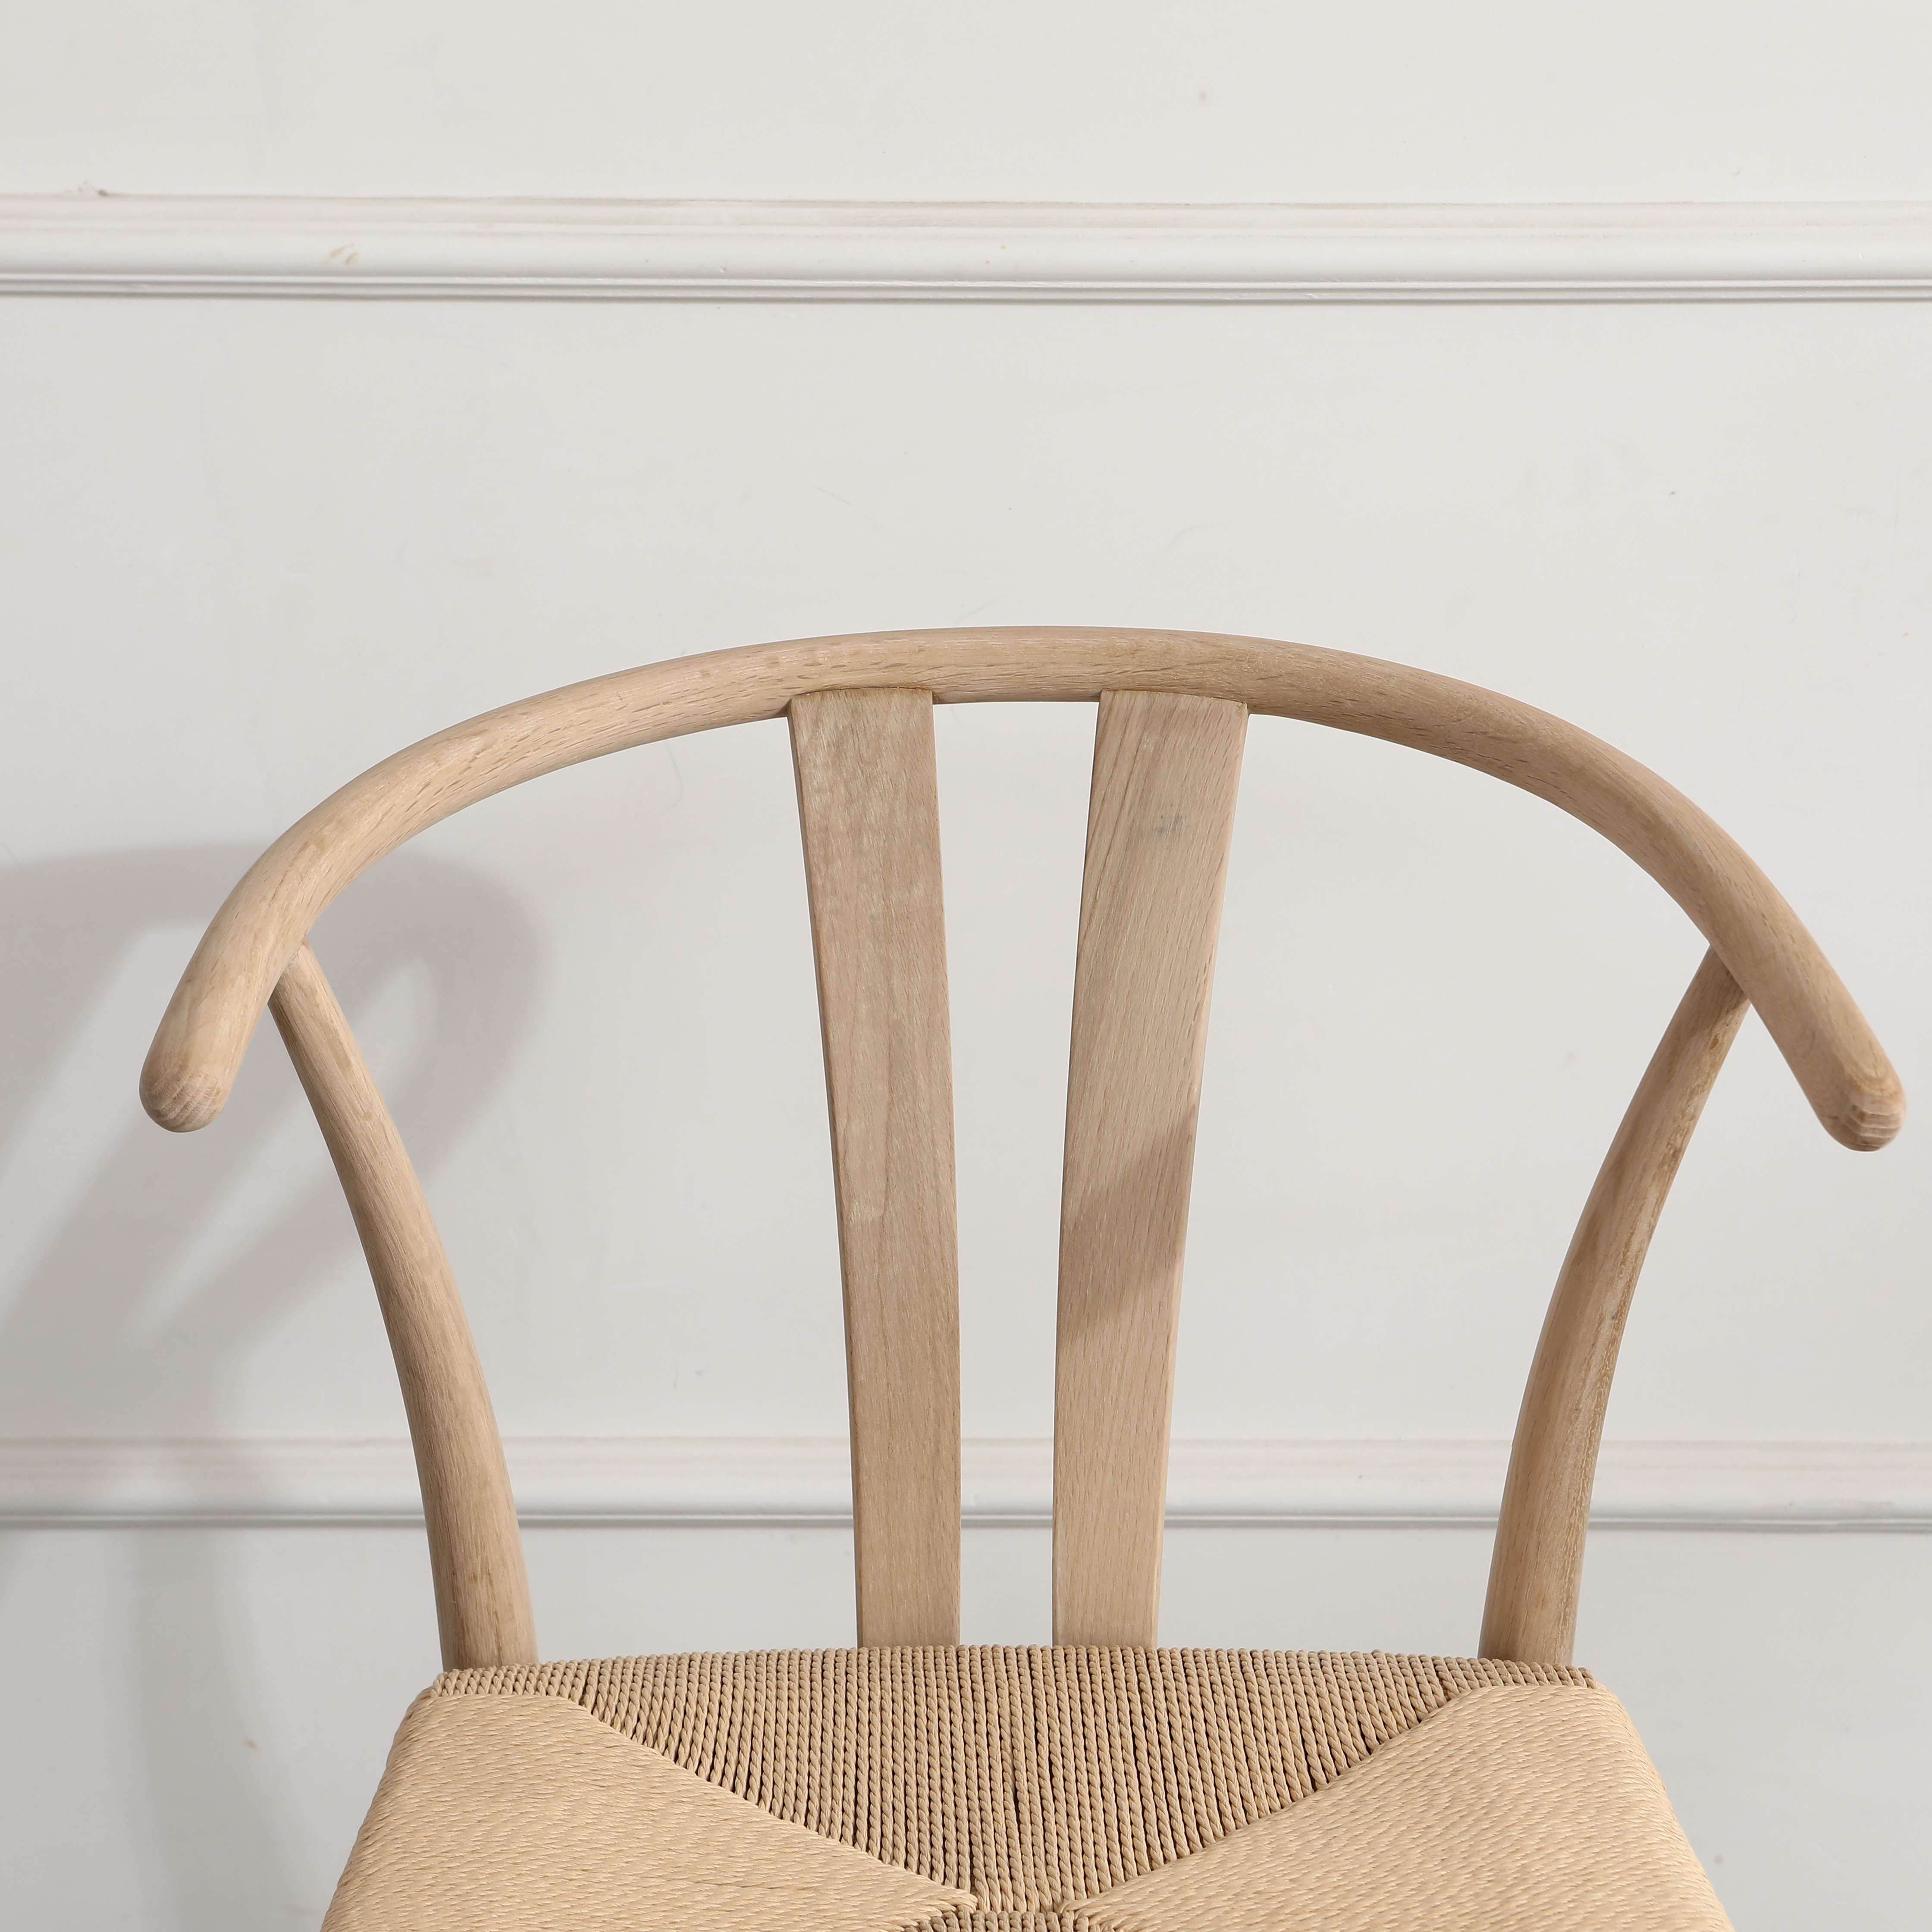 dining chair oak back with natural weave seat chair wood chair wood dining chair MDF chair oak chair oak dining chair oak wood chair white oak chair beech chair beech wood chair birch chair birch wood chair dining chair wooden chair solid wood chair offic